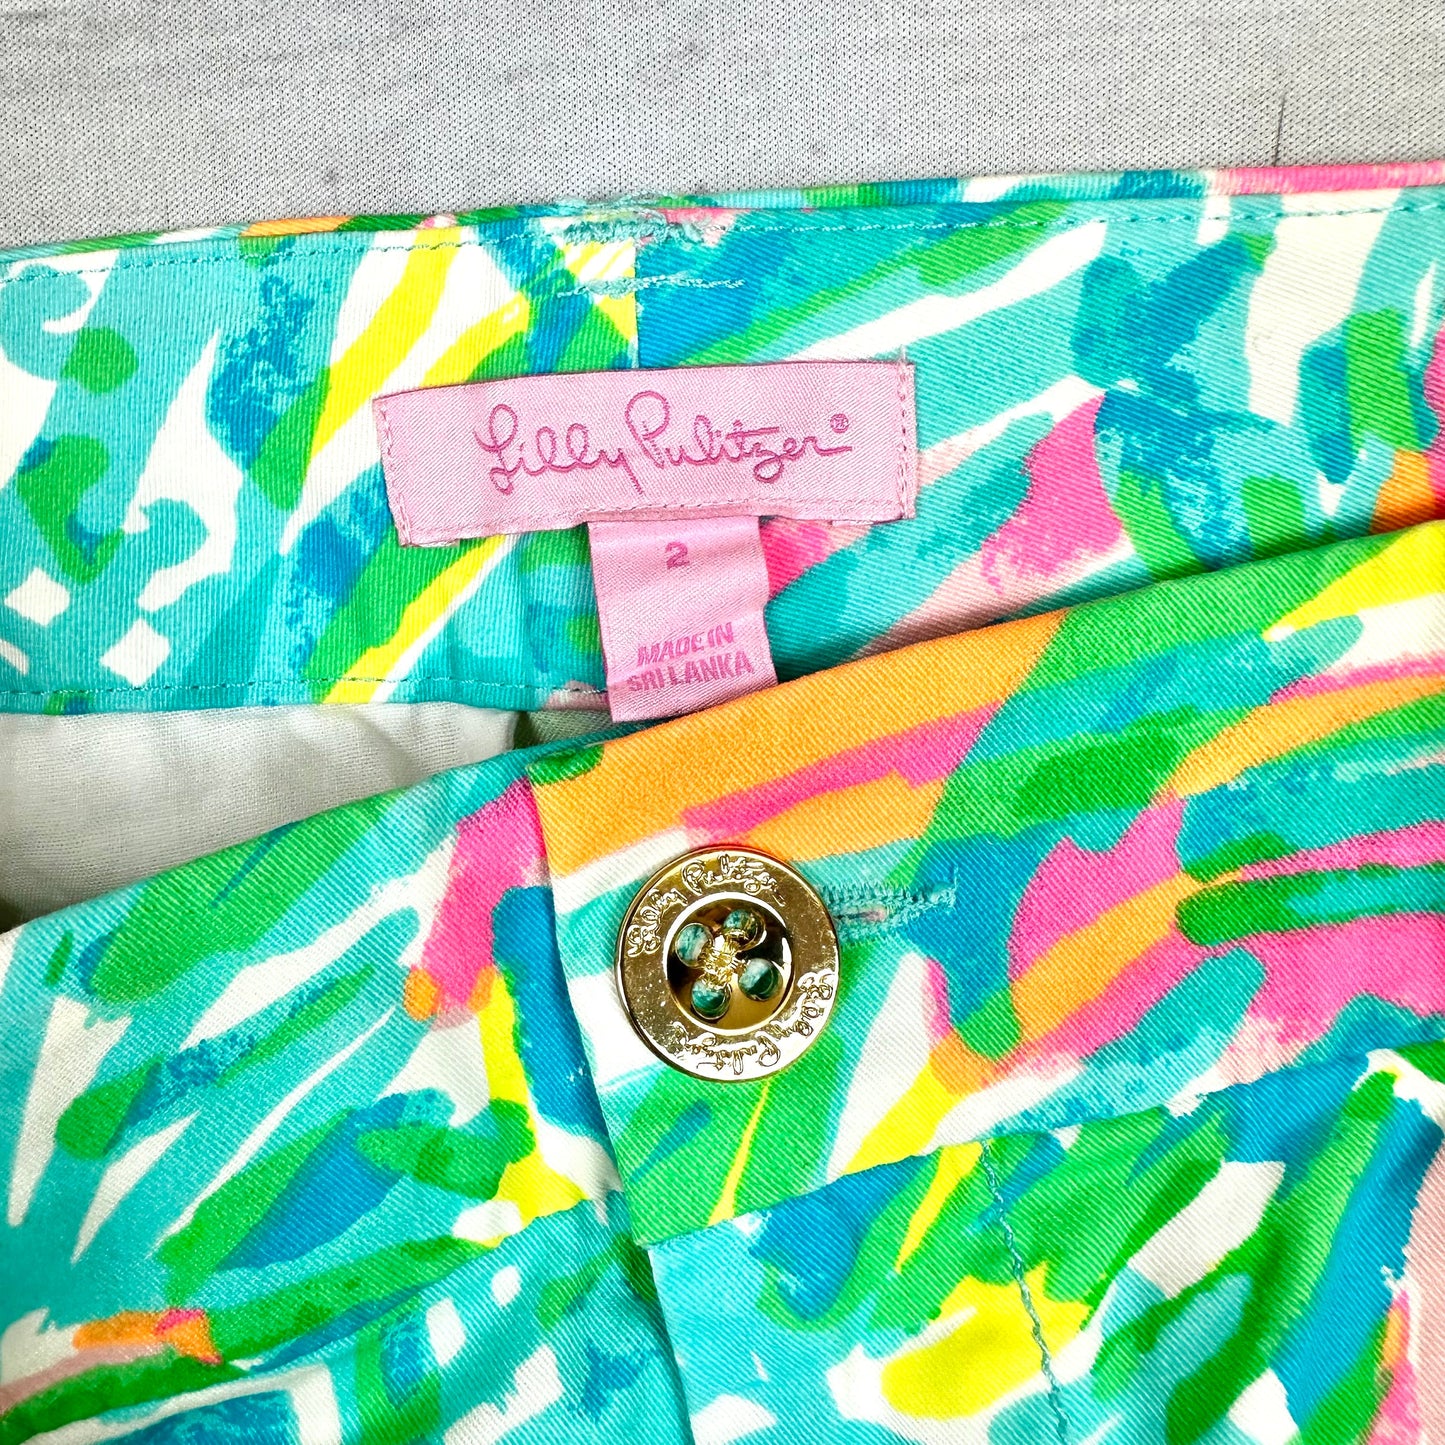 Pants Designer By Lilly Pulitzer  Size: 2